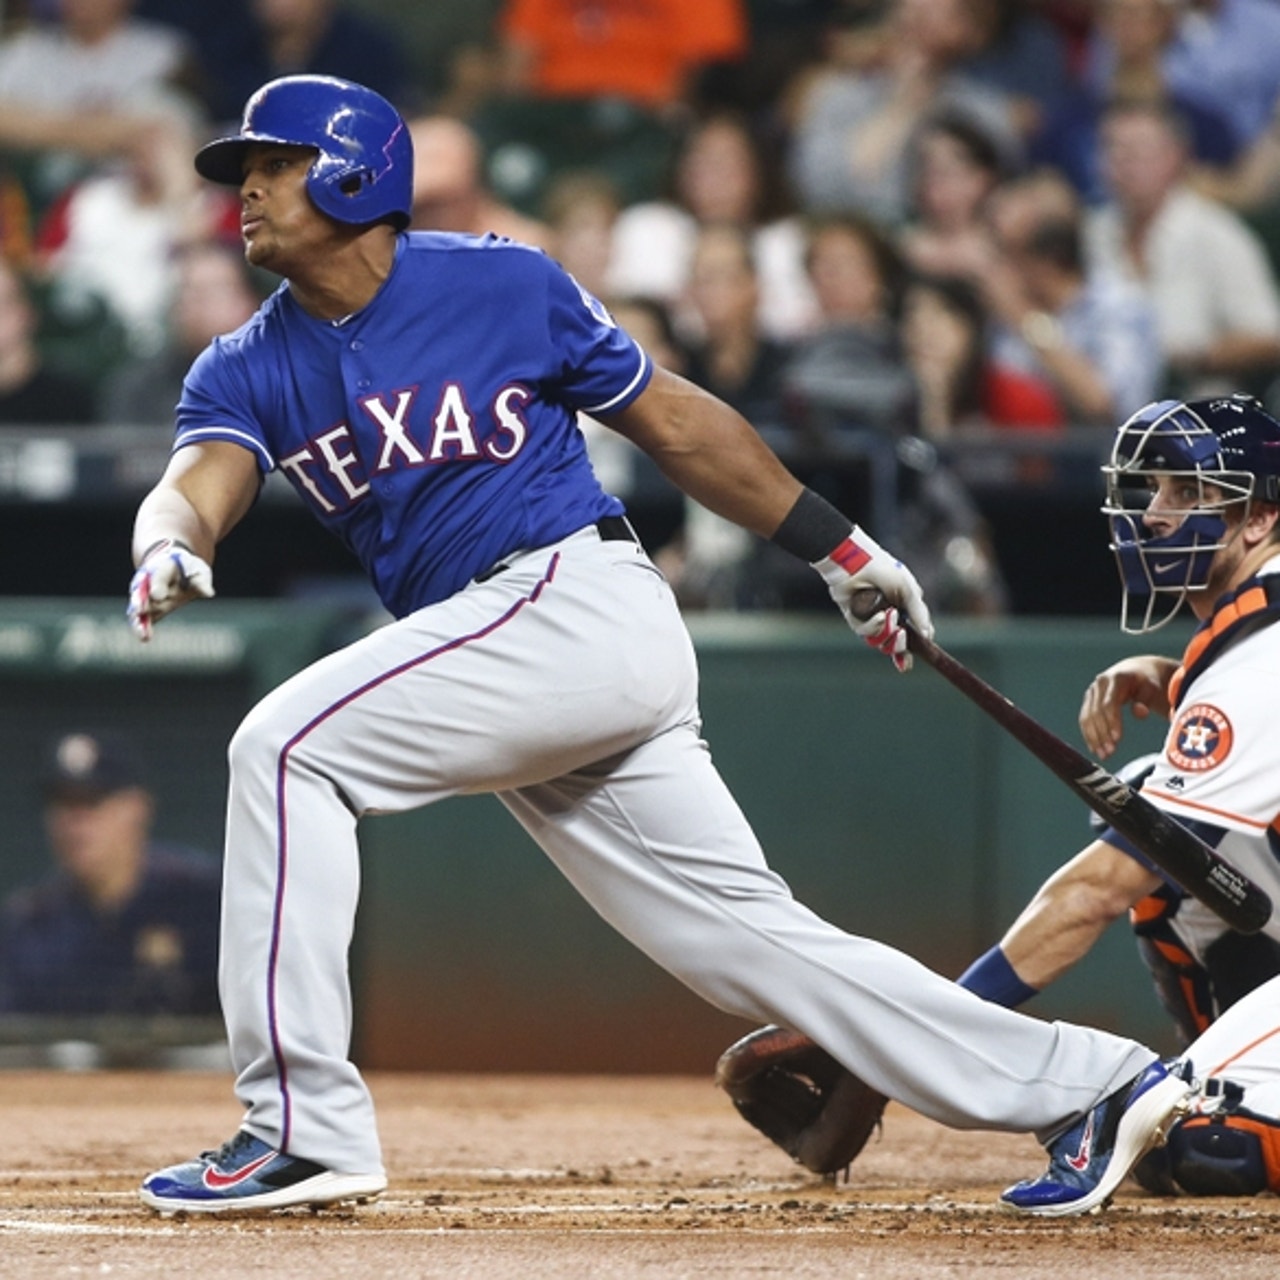 Adrian Beltre belts 30th home run of the season from one knee